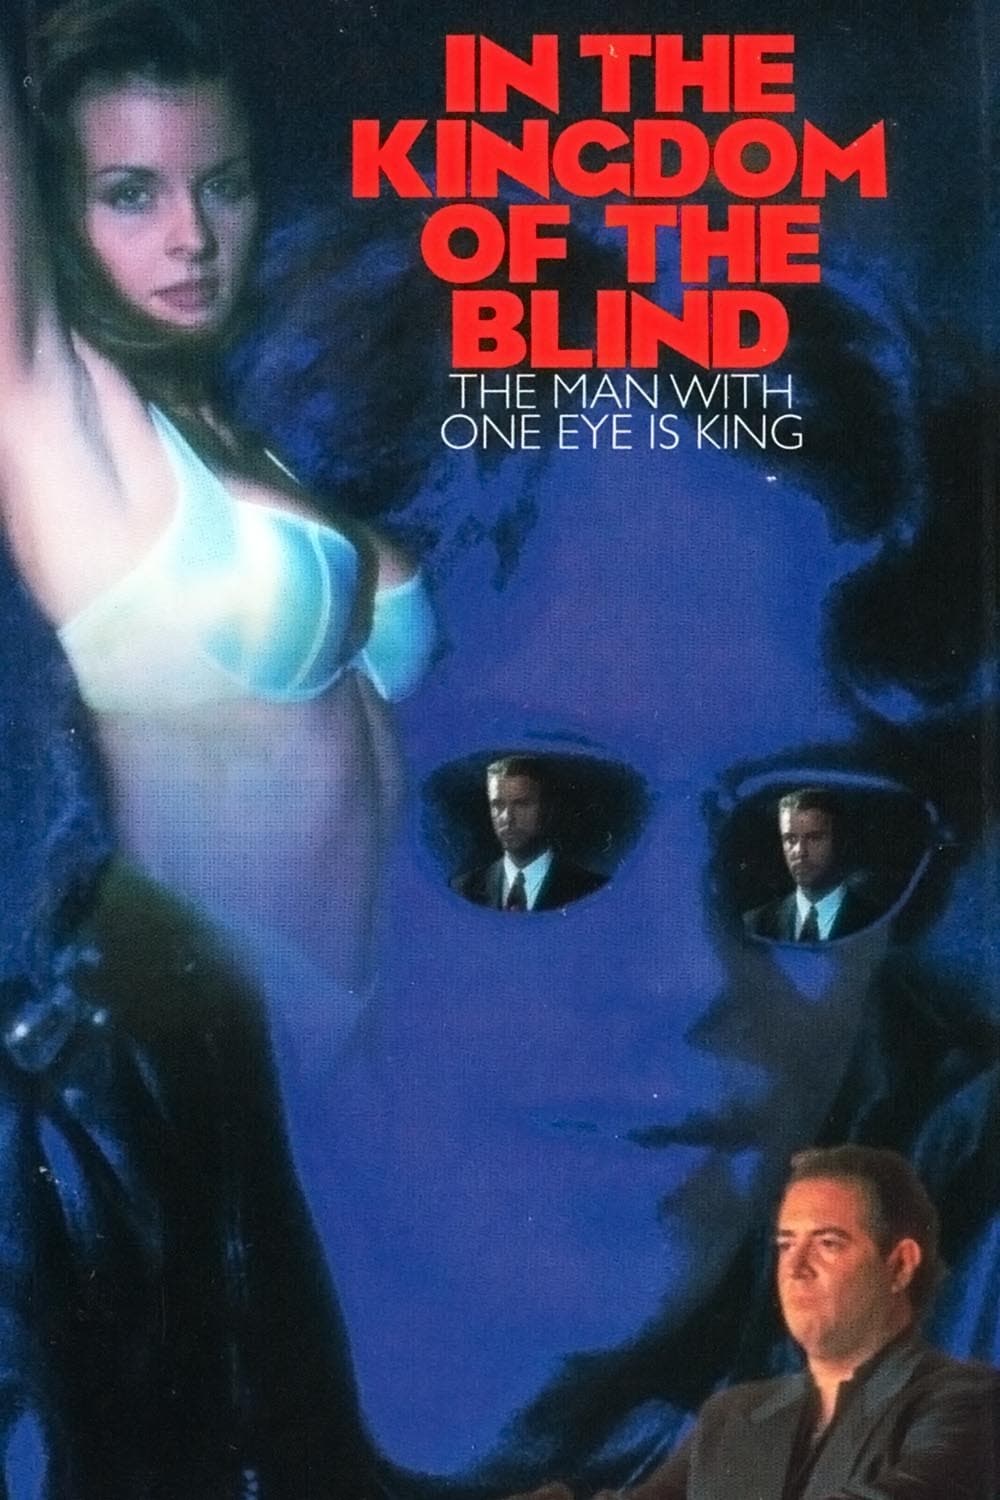 In the Kingdom of the Blind, the Man with One Eye Is King (1995)